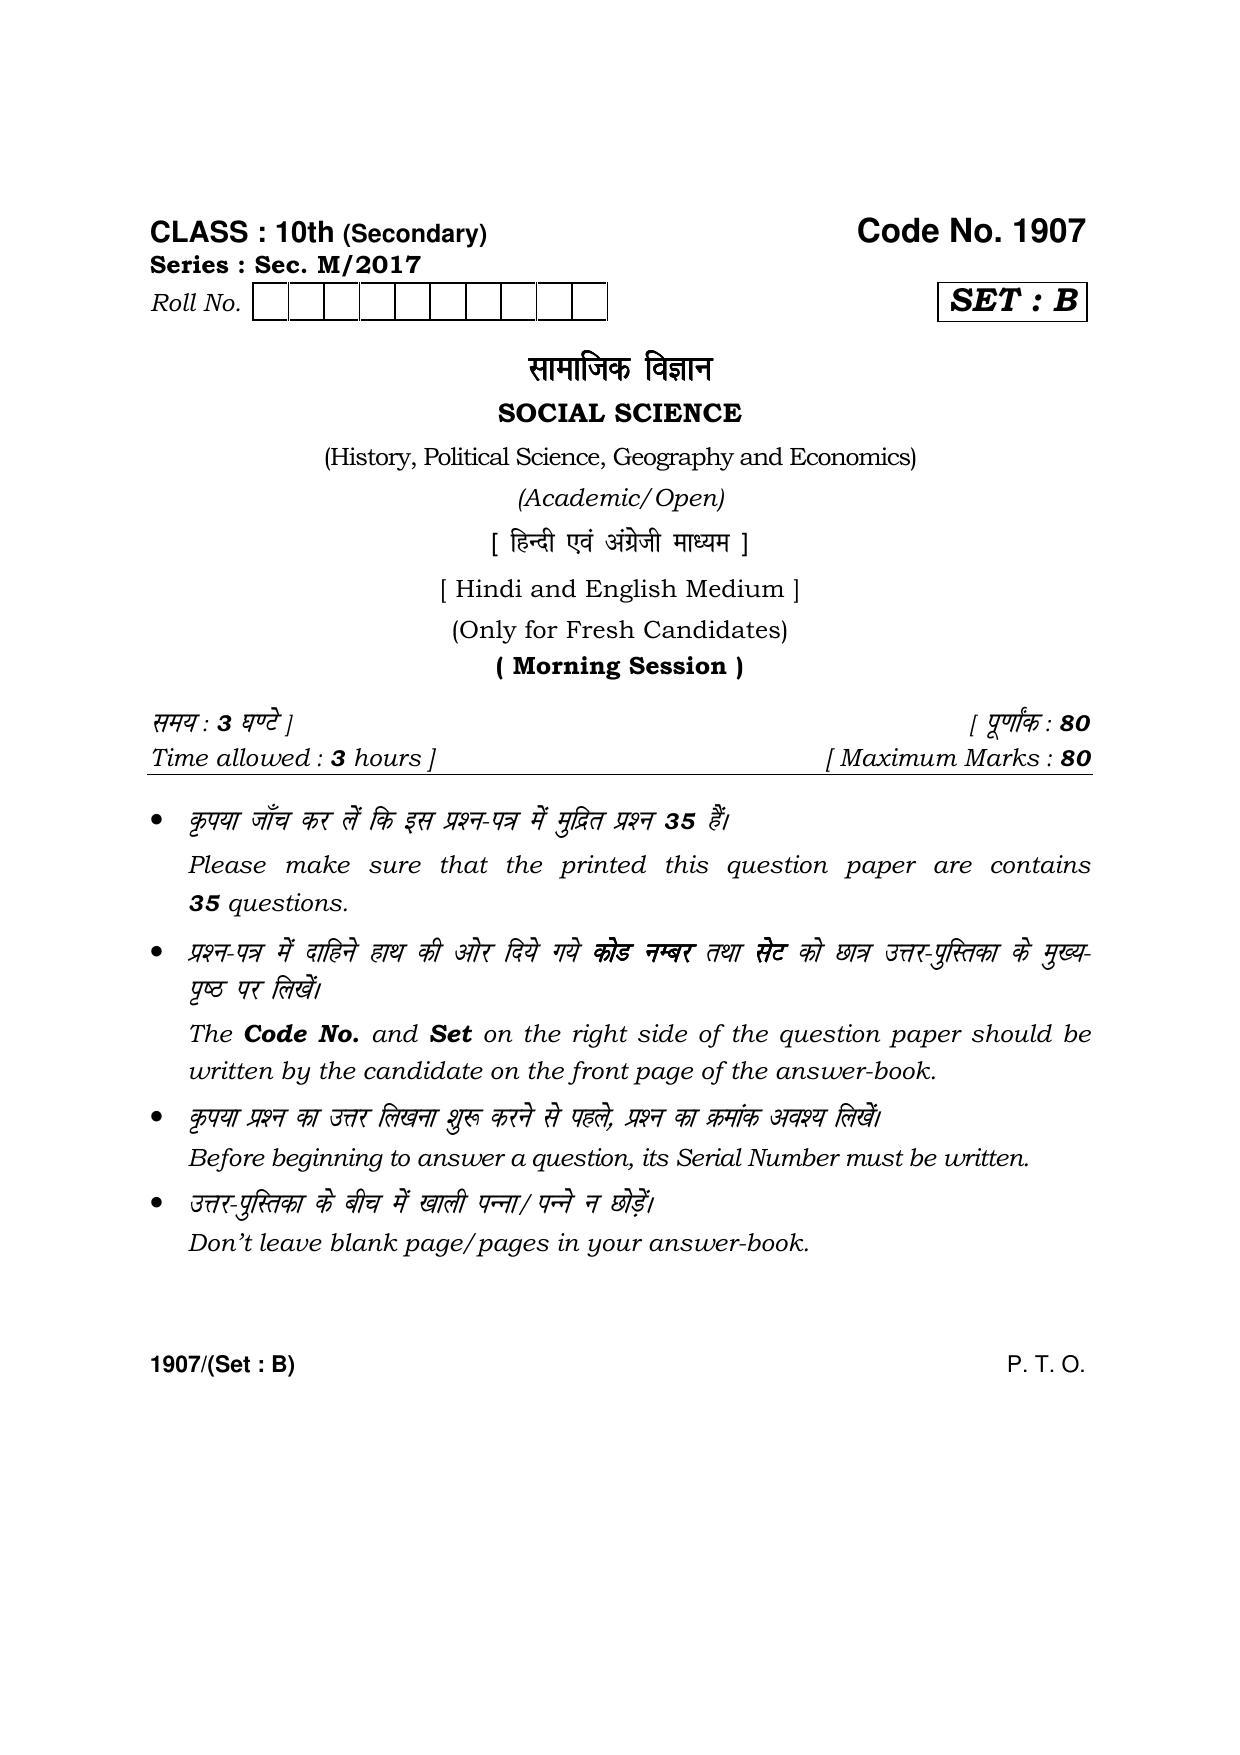 Haryana Board HBSE Class 10 Social Science -B 2017 Question Paper - Page 1